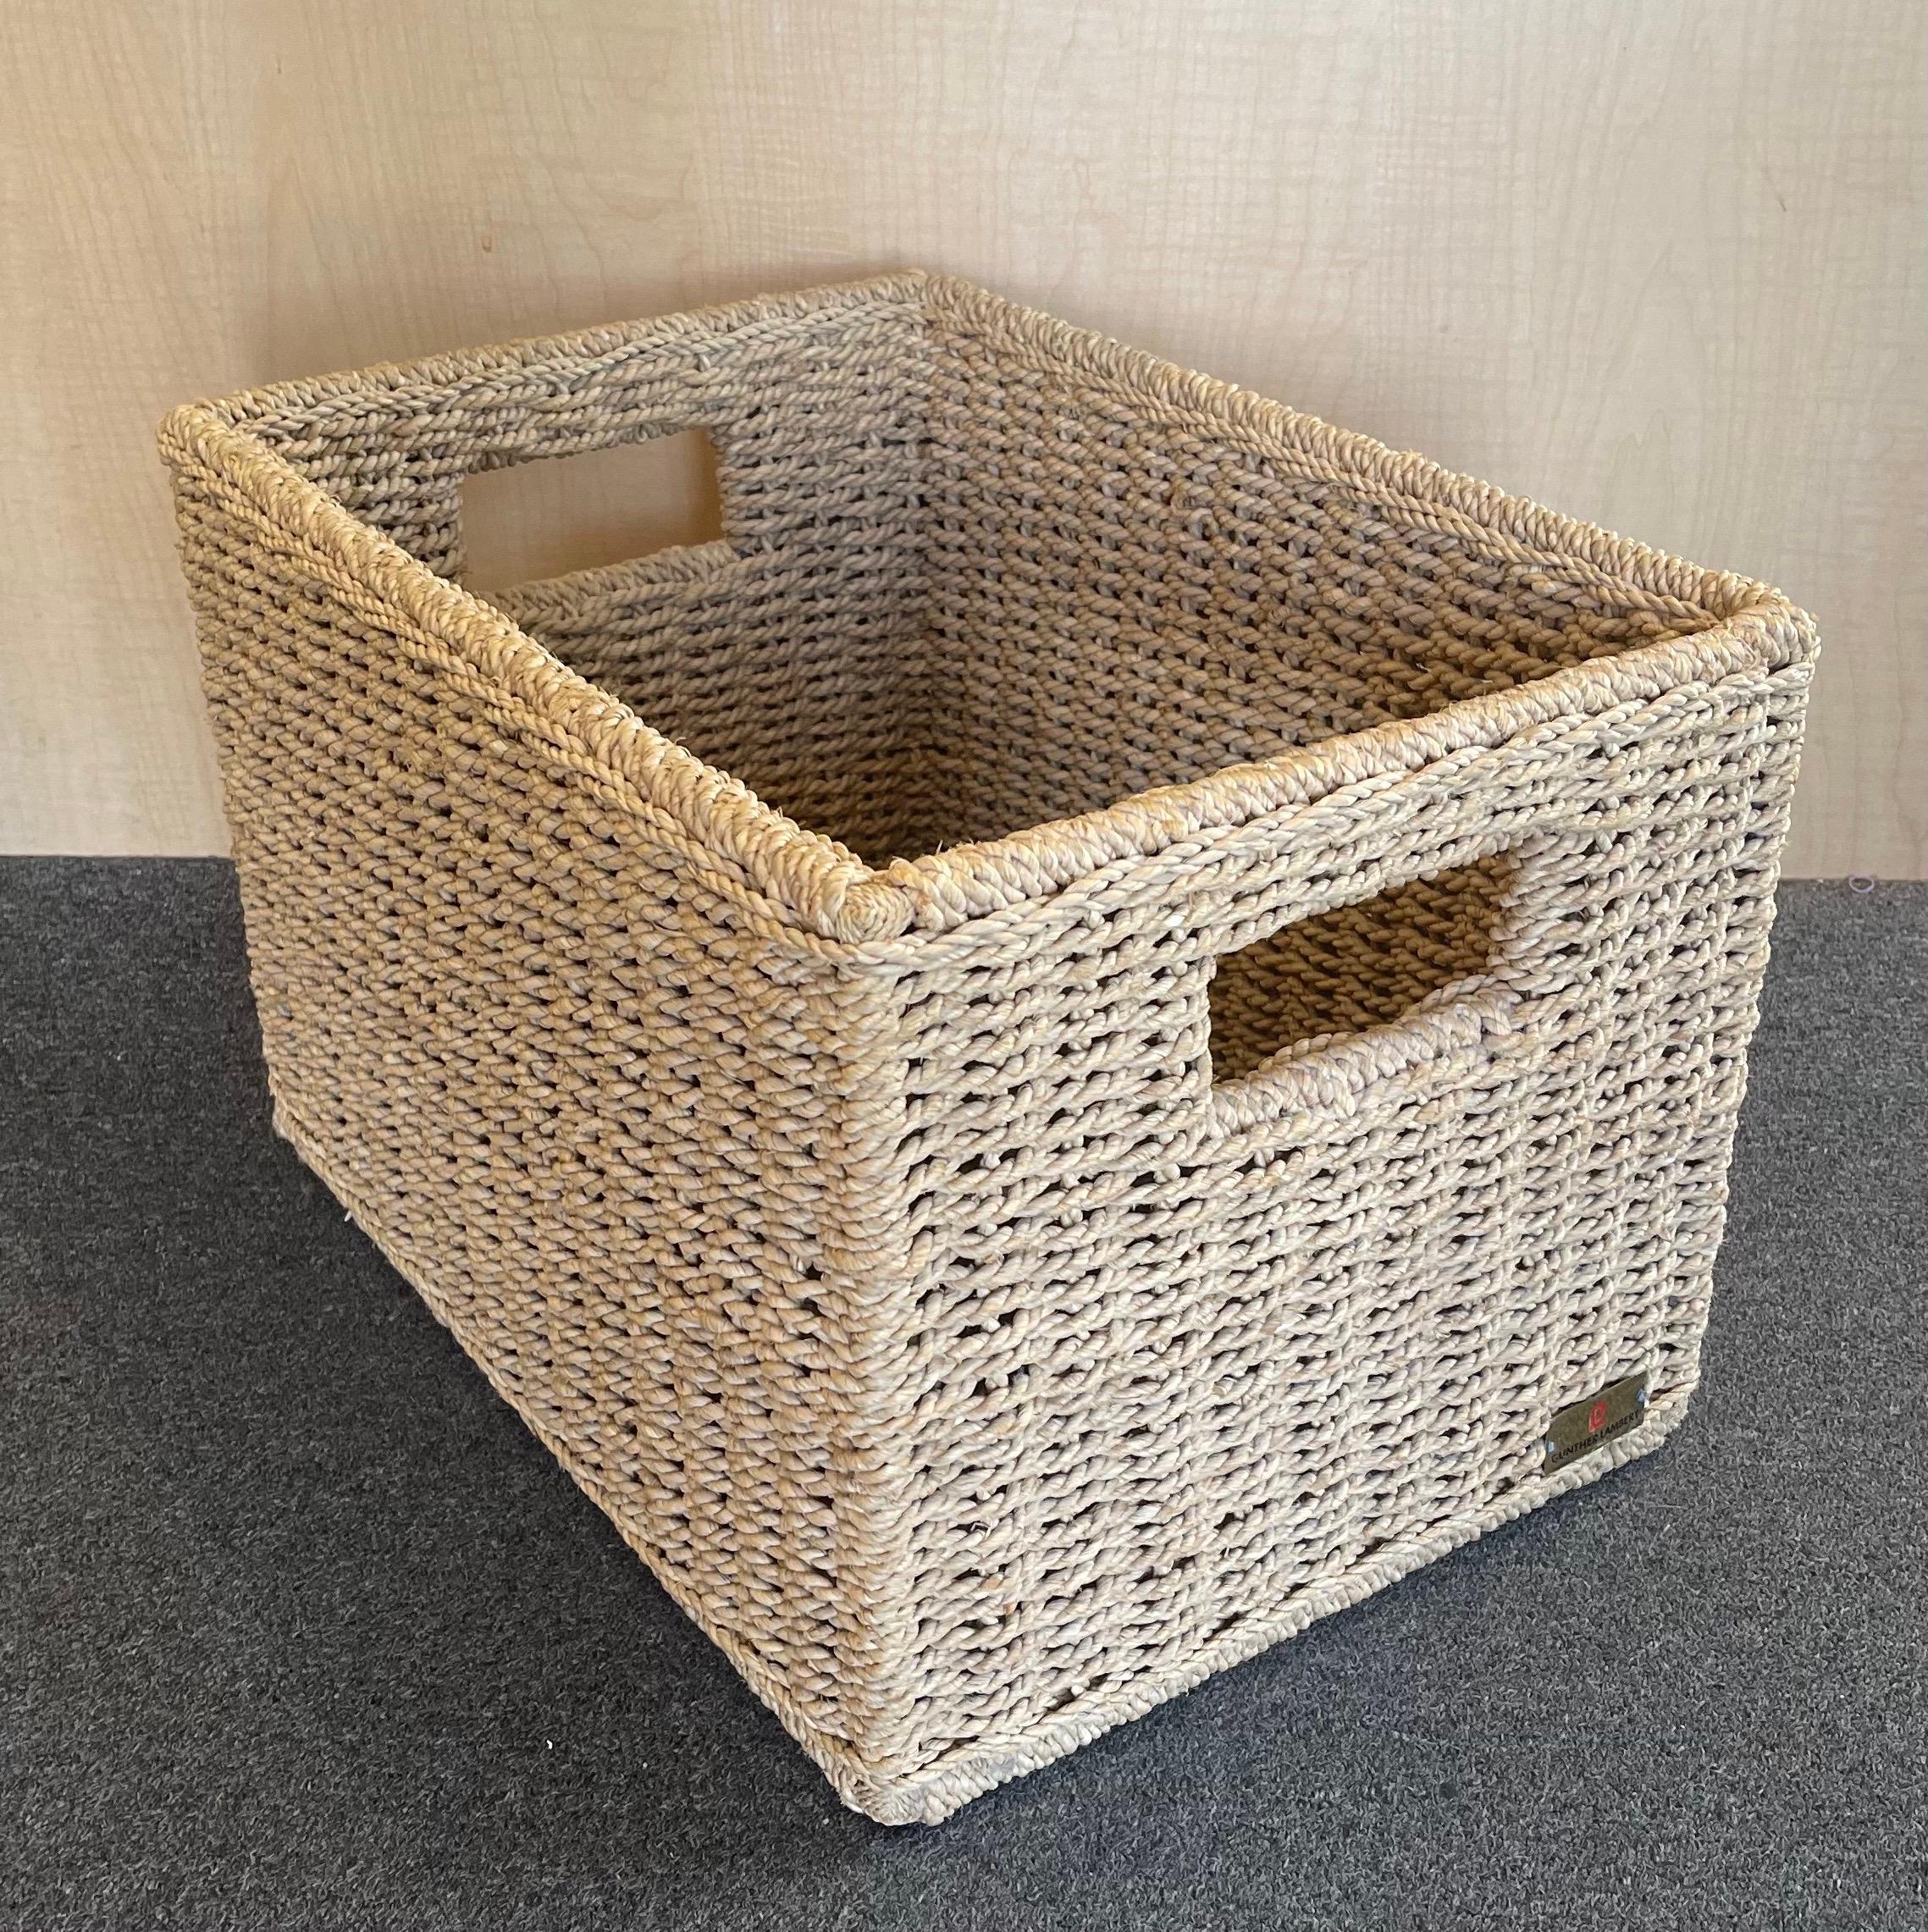 A super nice hand woven rope basket / magazine holder by Gunther Lambert, circa 1980s. The piece is signed on the side, is in very good vintage condition and measures 14.25